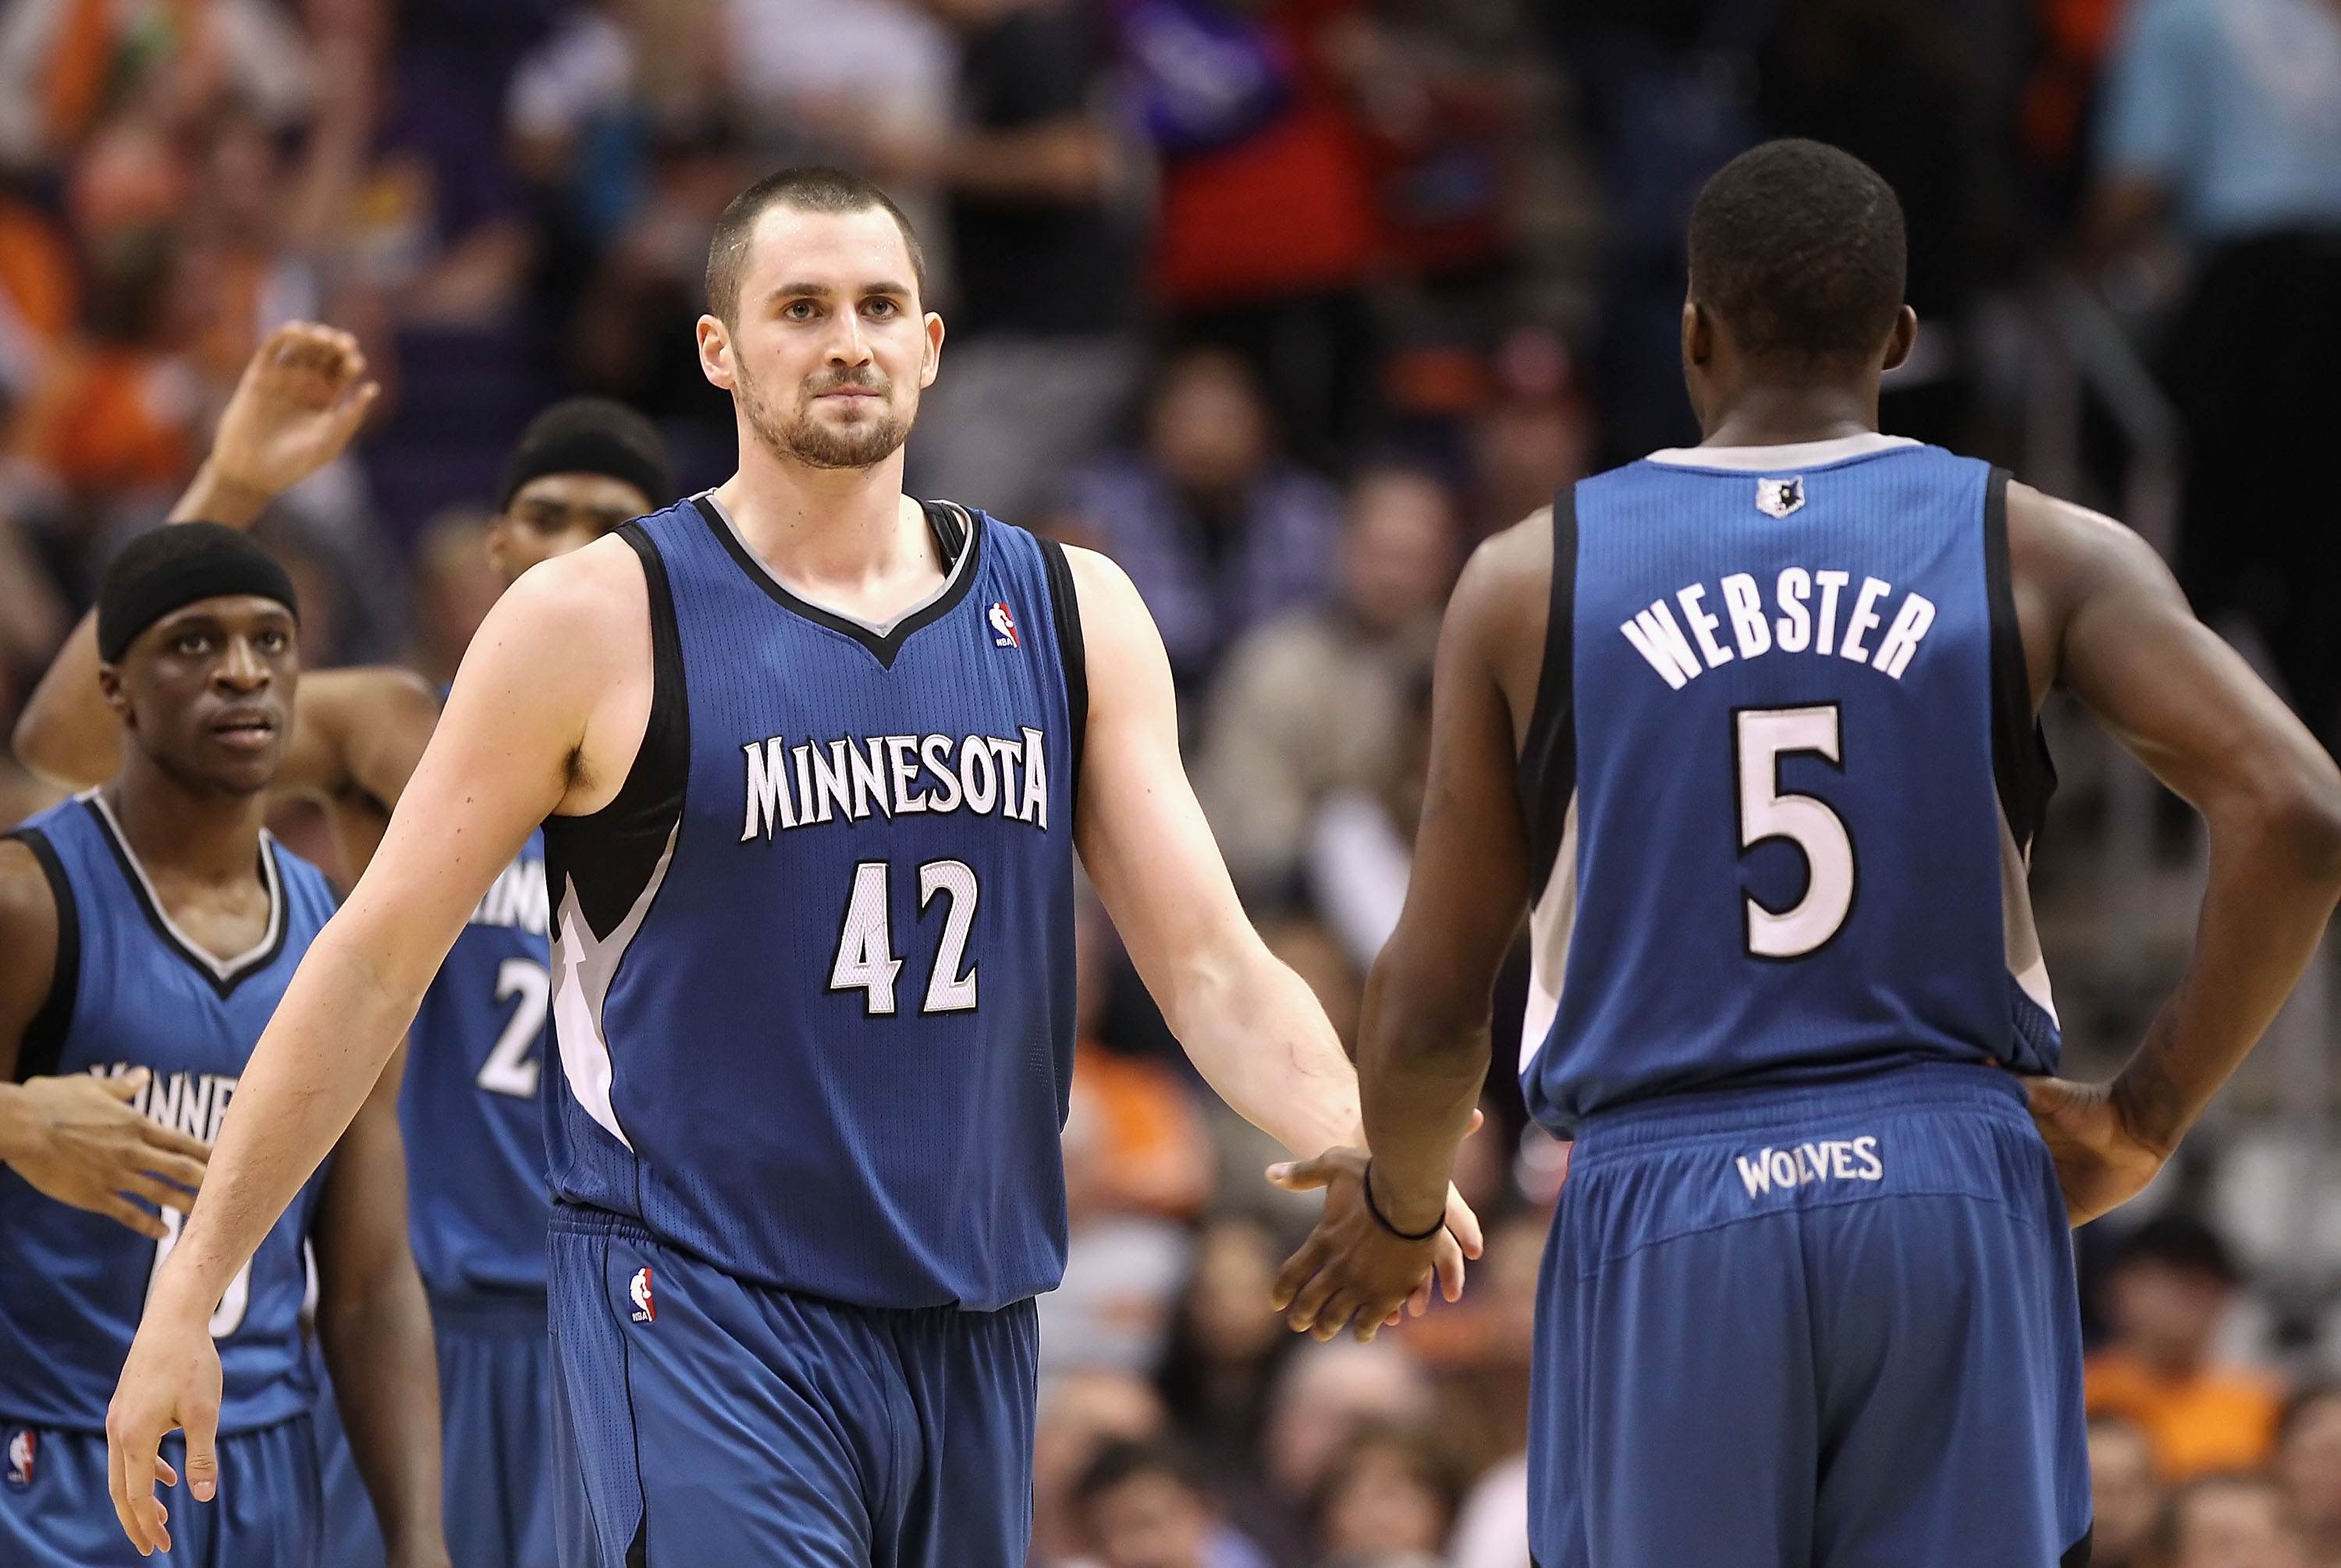 PHOENIX - DECEMBER 15:  Kevin Love #42 of the Minnesota Timberwolves high fives teammate Martell Webster #5 during the NBA game against the Phoenix Suns at US Airways Center on December 15, 2010 in Phoenix, Arizona.  The Suns defeated the Timberwolves 128